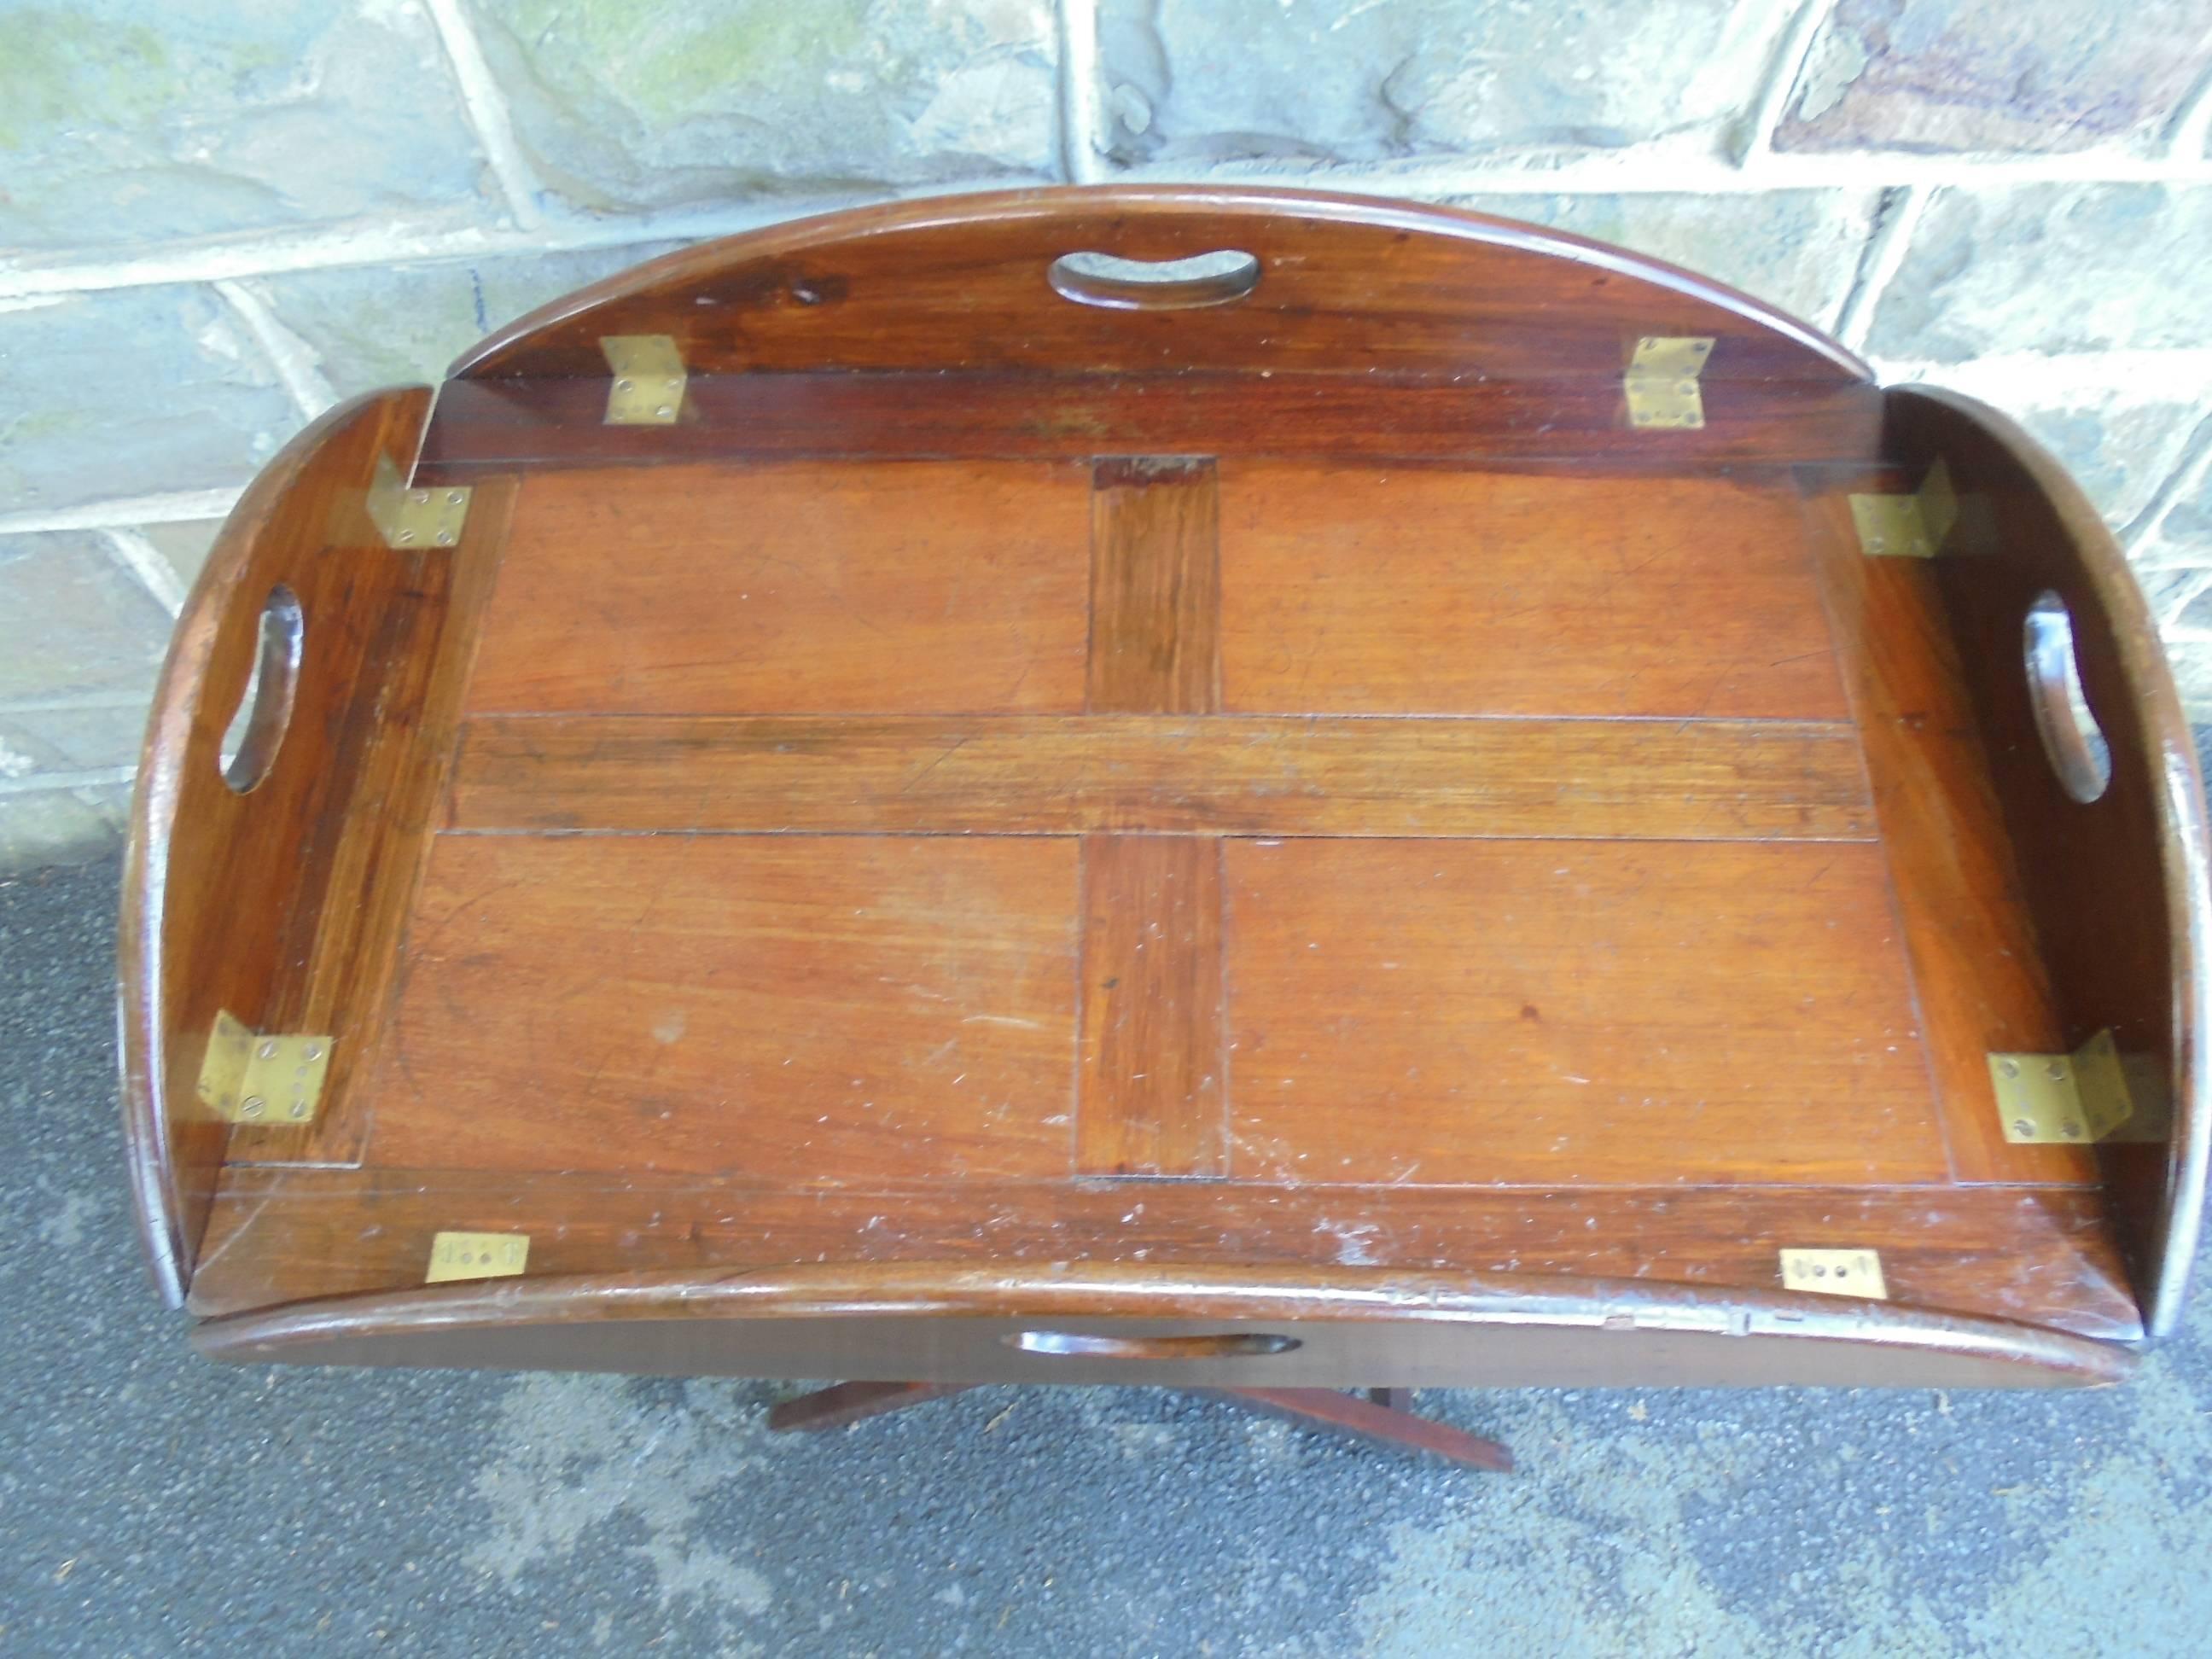 Offered for sale is this quality mahogany butlers tray on stand.

The mahogany folding frame stand having stamped registration numbers. The removable mahogany tray has fold down sides with cut-out handles and brass hinges.

Offered in very good